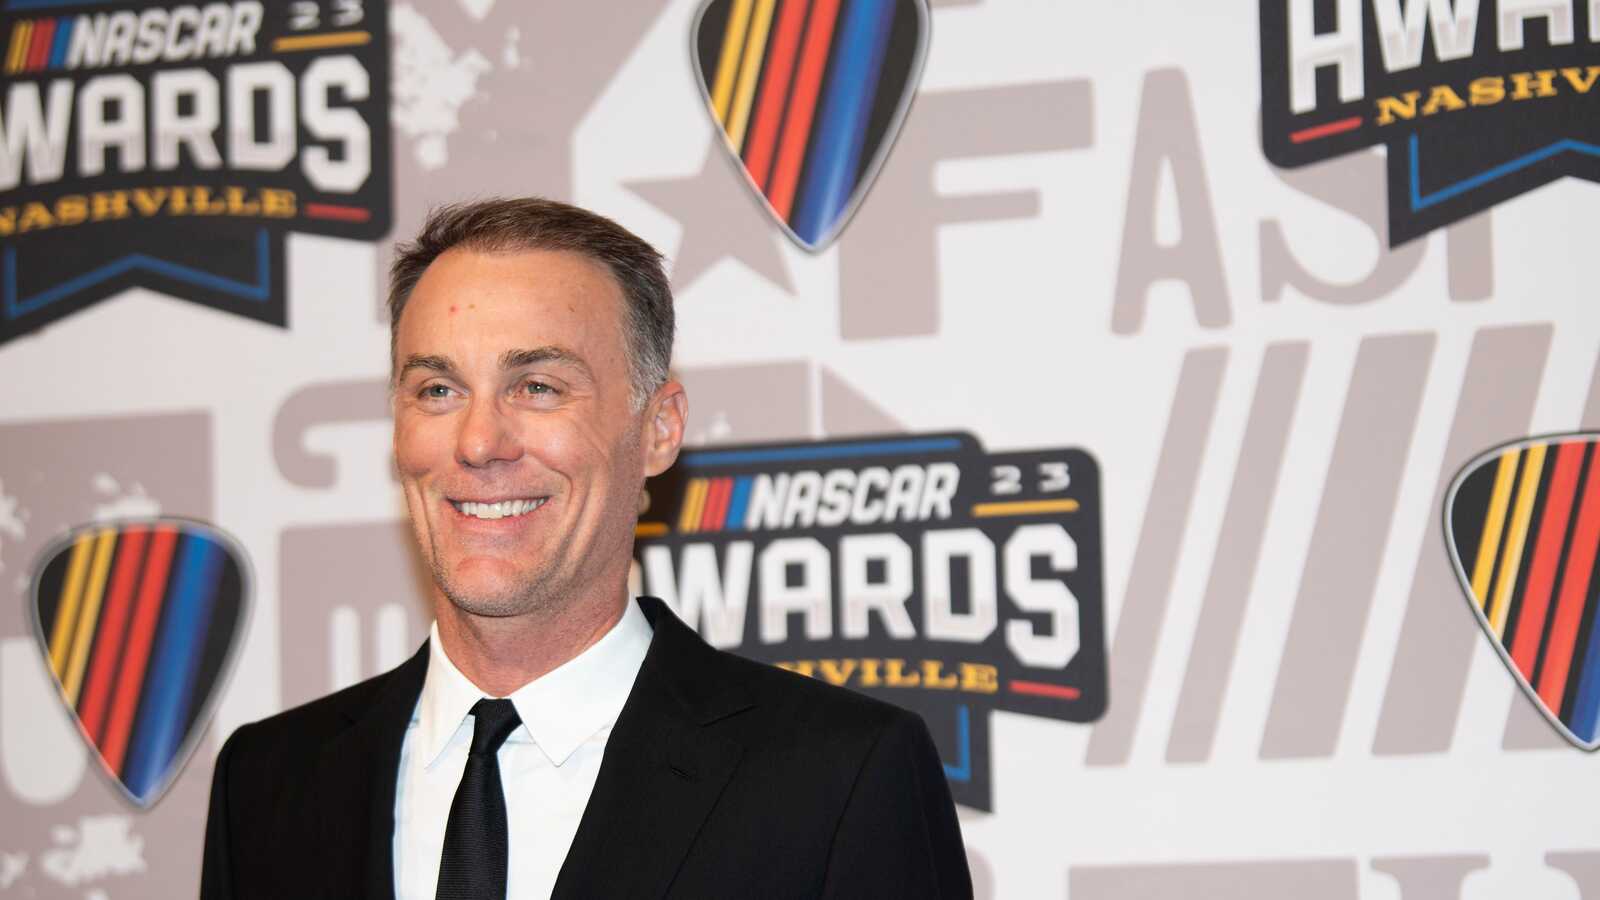 Kevin Harvick asserts not winning at Talladega would be 'an absolute failure' for Ford